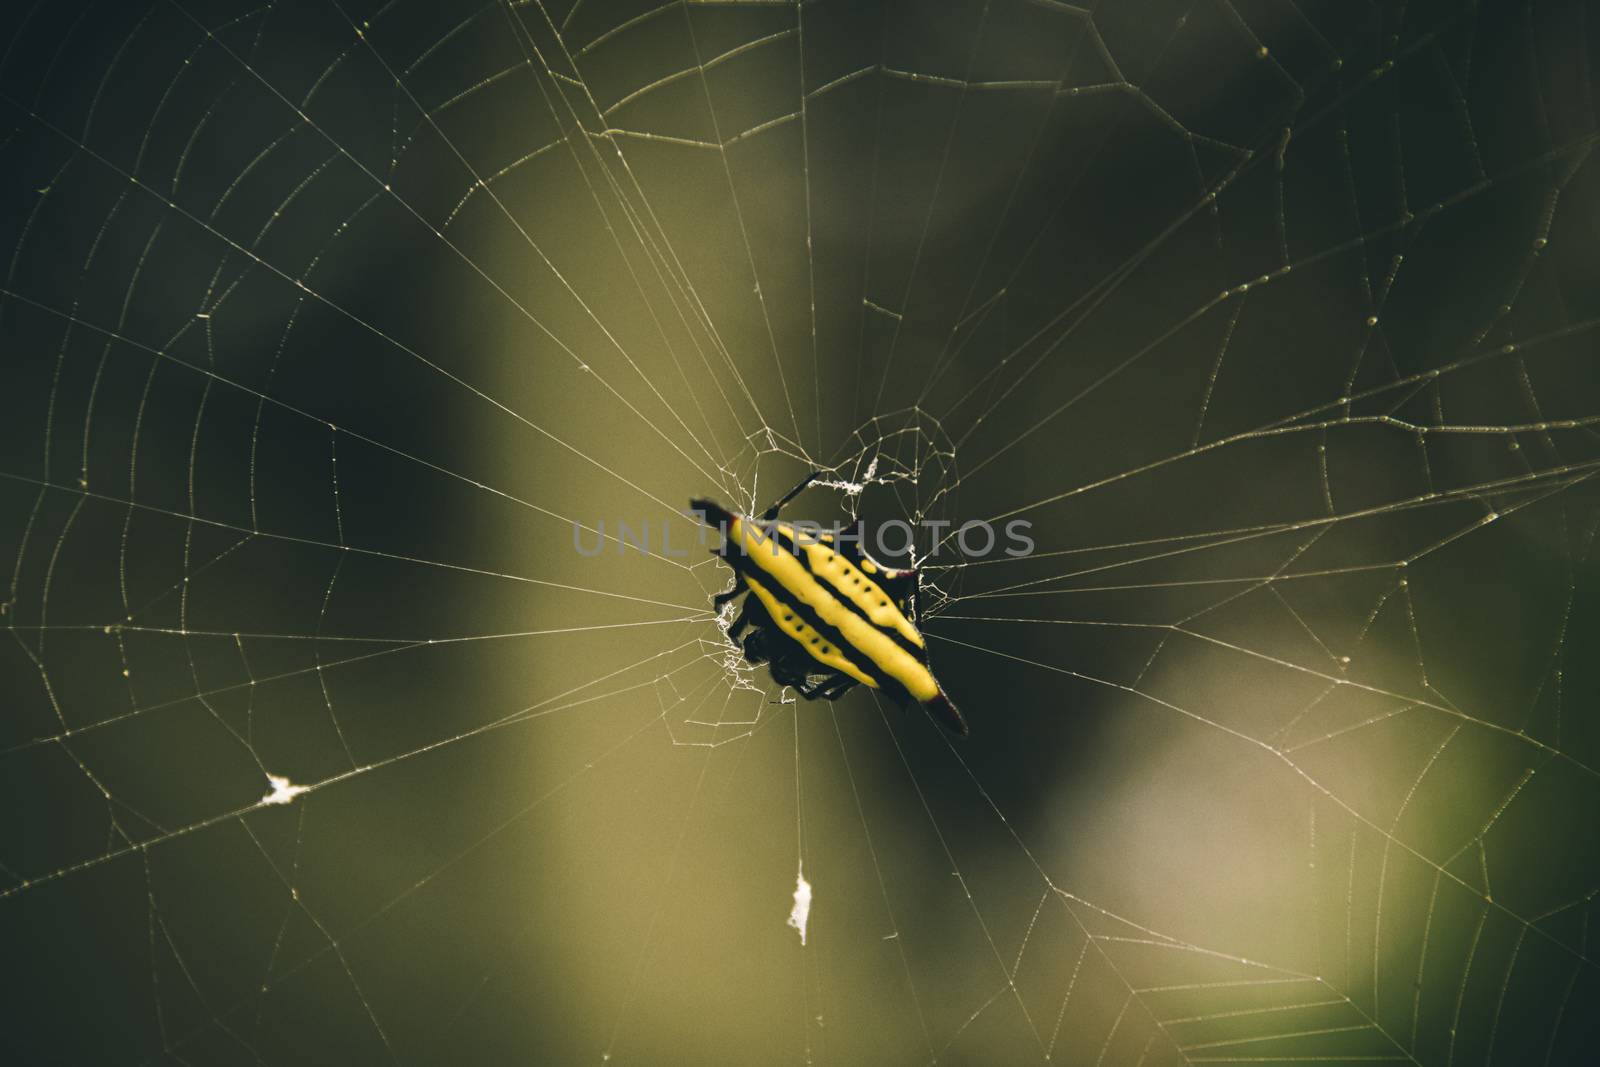 A spinybacked orbweaver spider or Gasteracantha cancriformis (Linnaeus) spotted at Cuc Phuong National Park in Vietnam